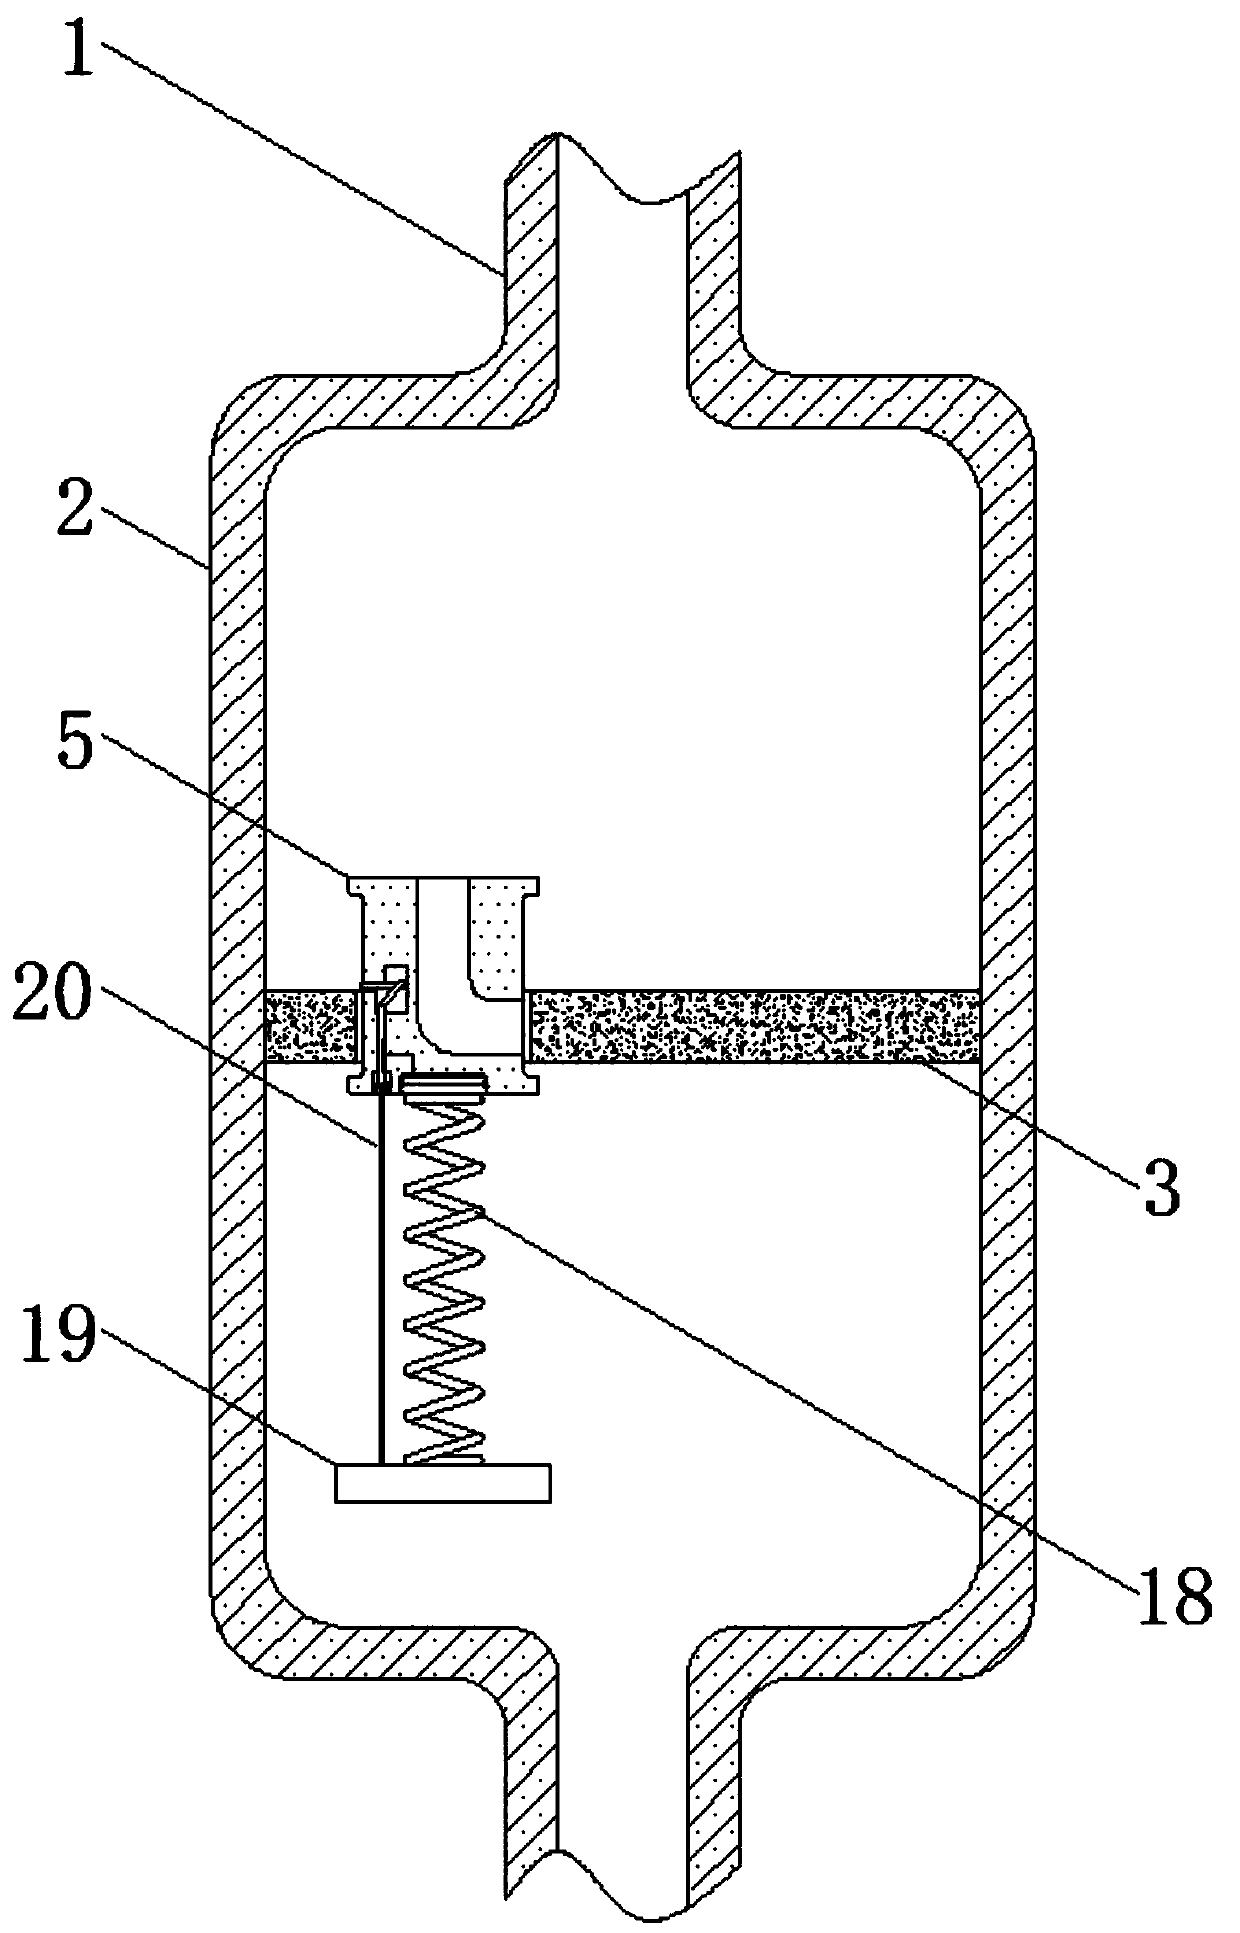 Peripheral blood stem cell and marrow blood reinfusion device